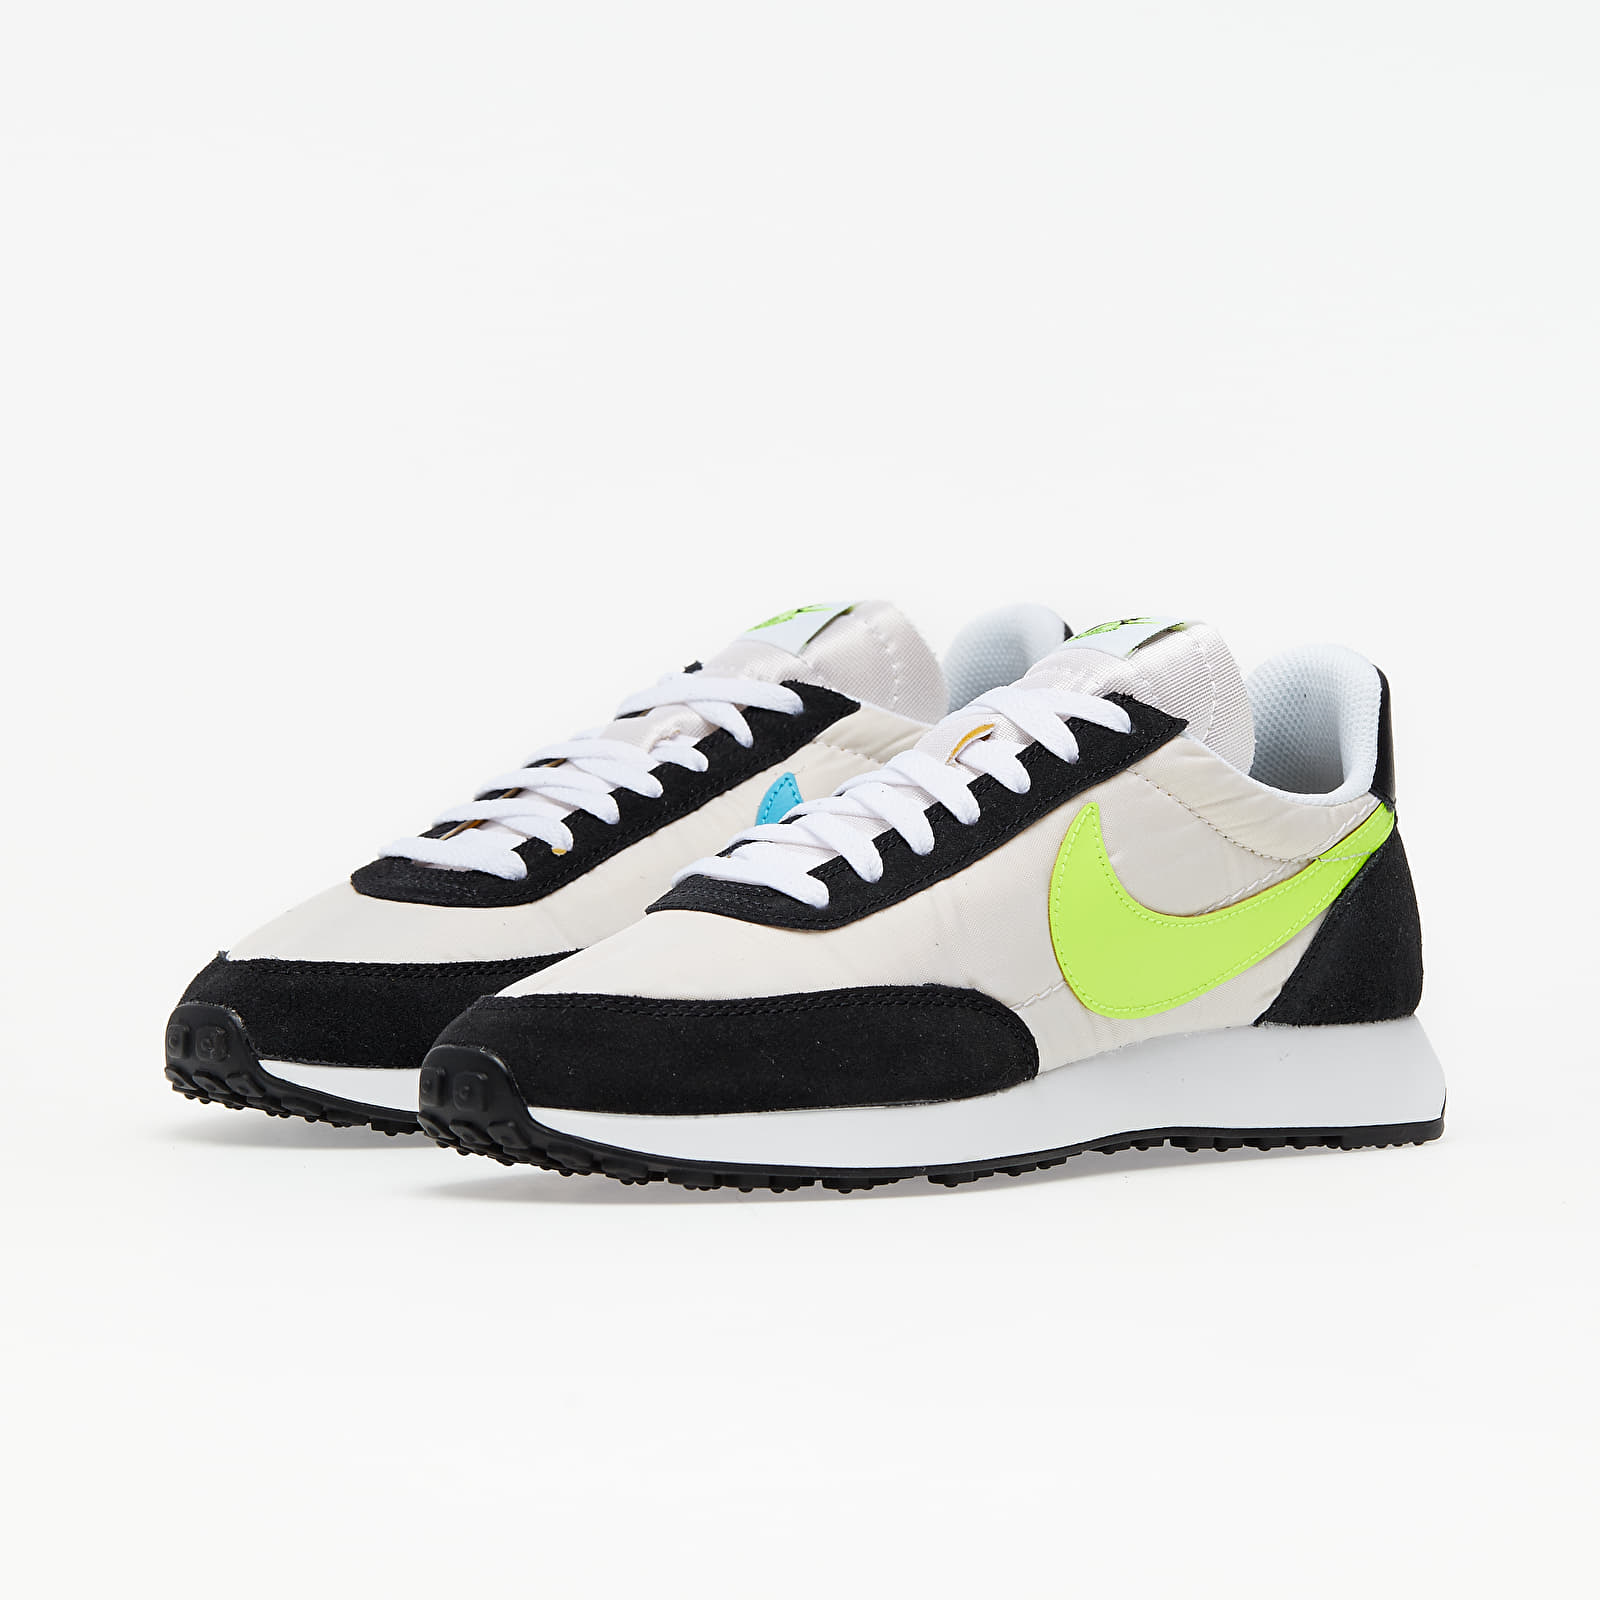 Nike Mens Air Tailwind 79 Trainers